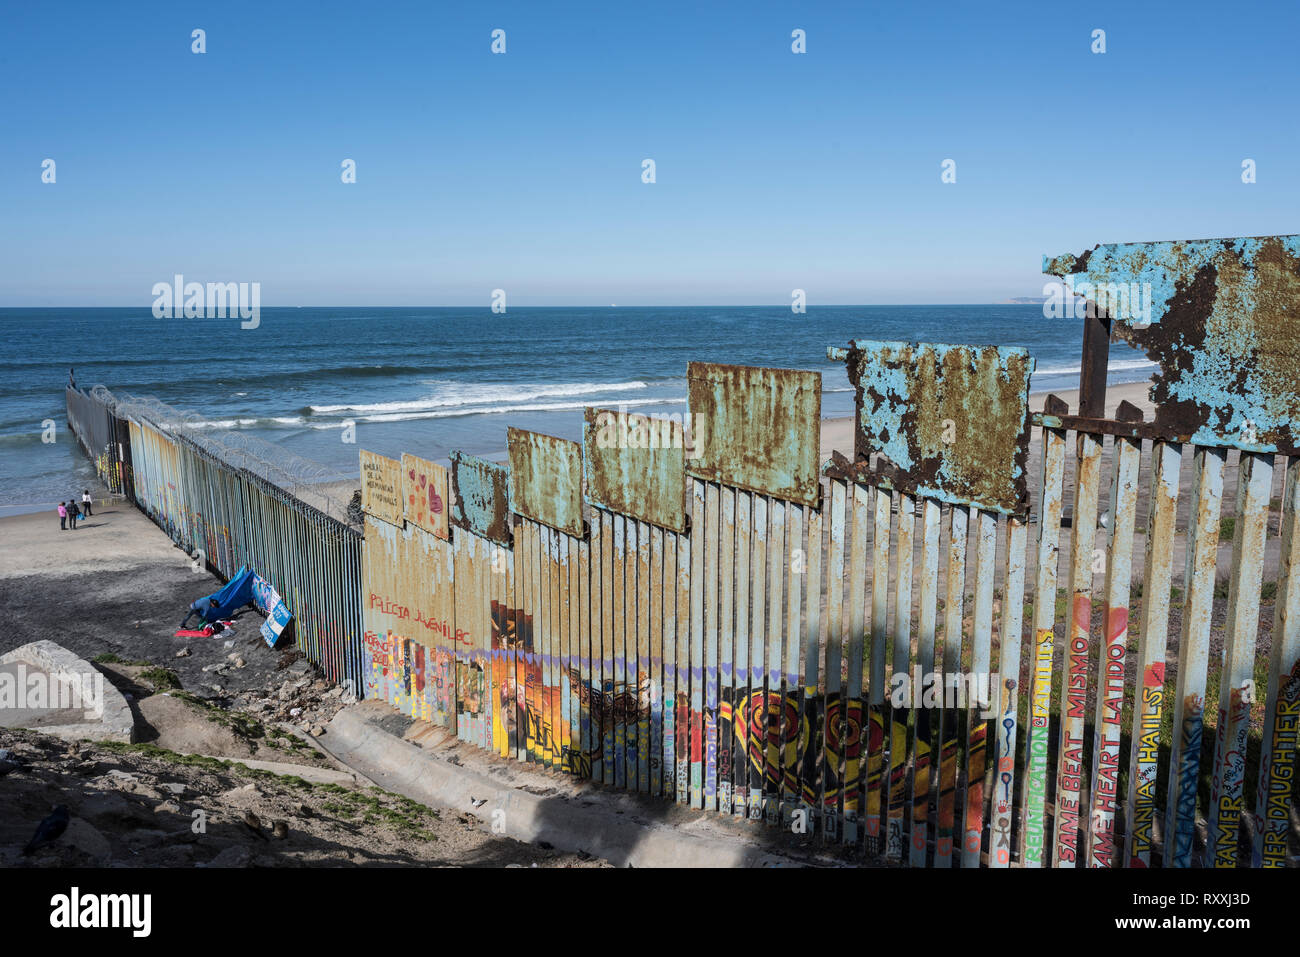 Sightseeing of the borderline at Tijuana Mexico at the sea Stock Photo